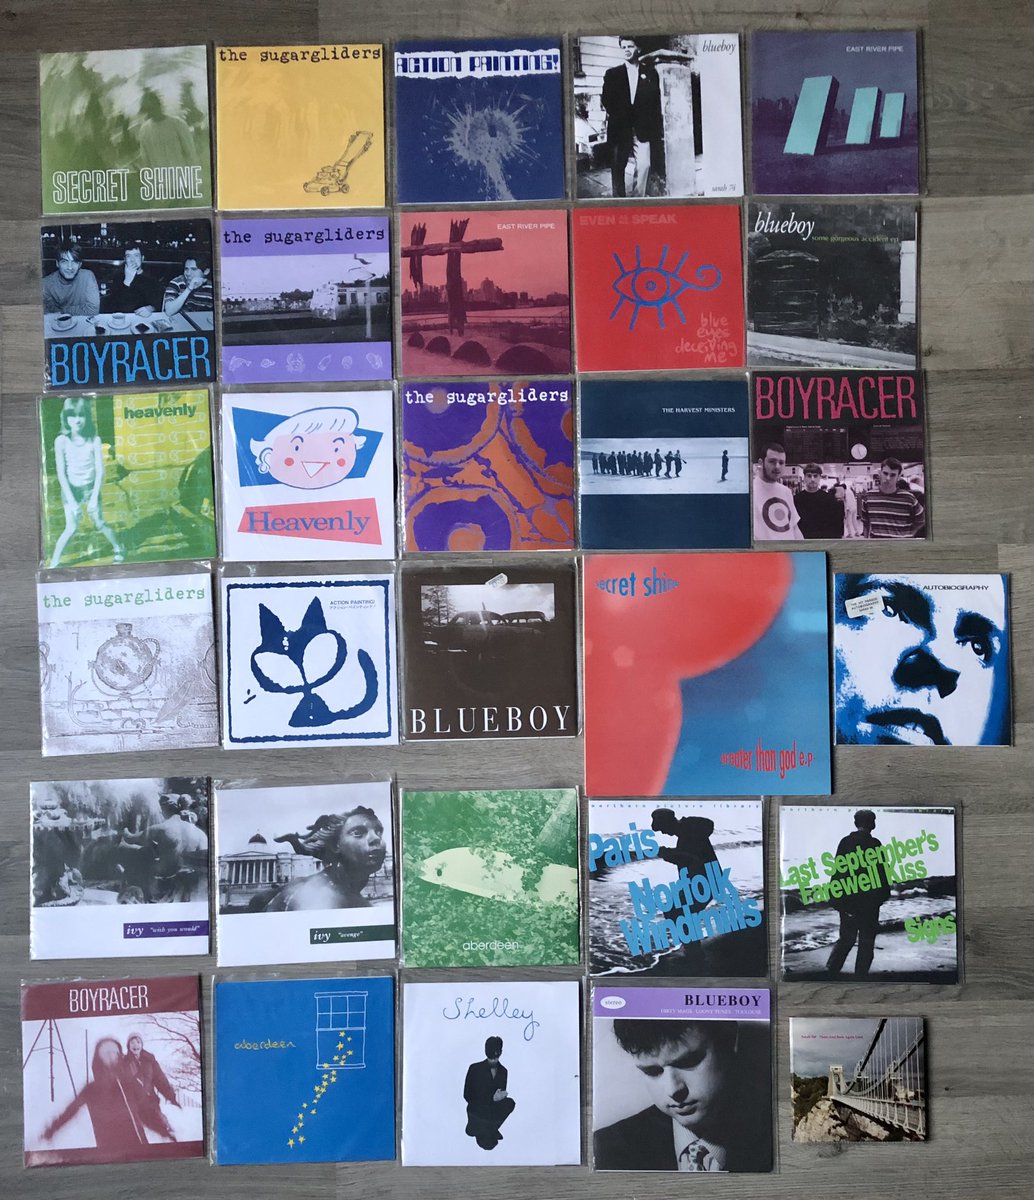 Day 20 #Top20SarahRecords Sarah 1 to 100. Or The Sarah 100 as it is often referred to! A real thing of pure joy that we have @Sarah_Records and @UncharteredS to thank for! After all these years I love every single one of them and it’s great to have them all together again!❤️🍒🍒